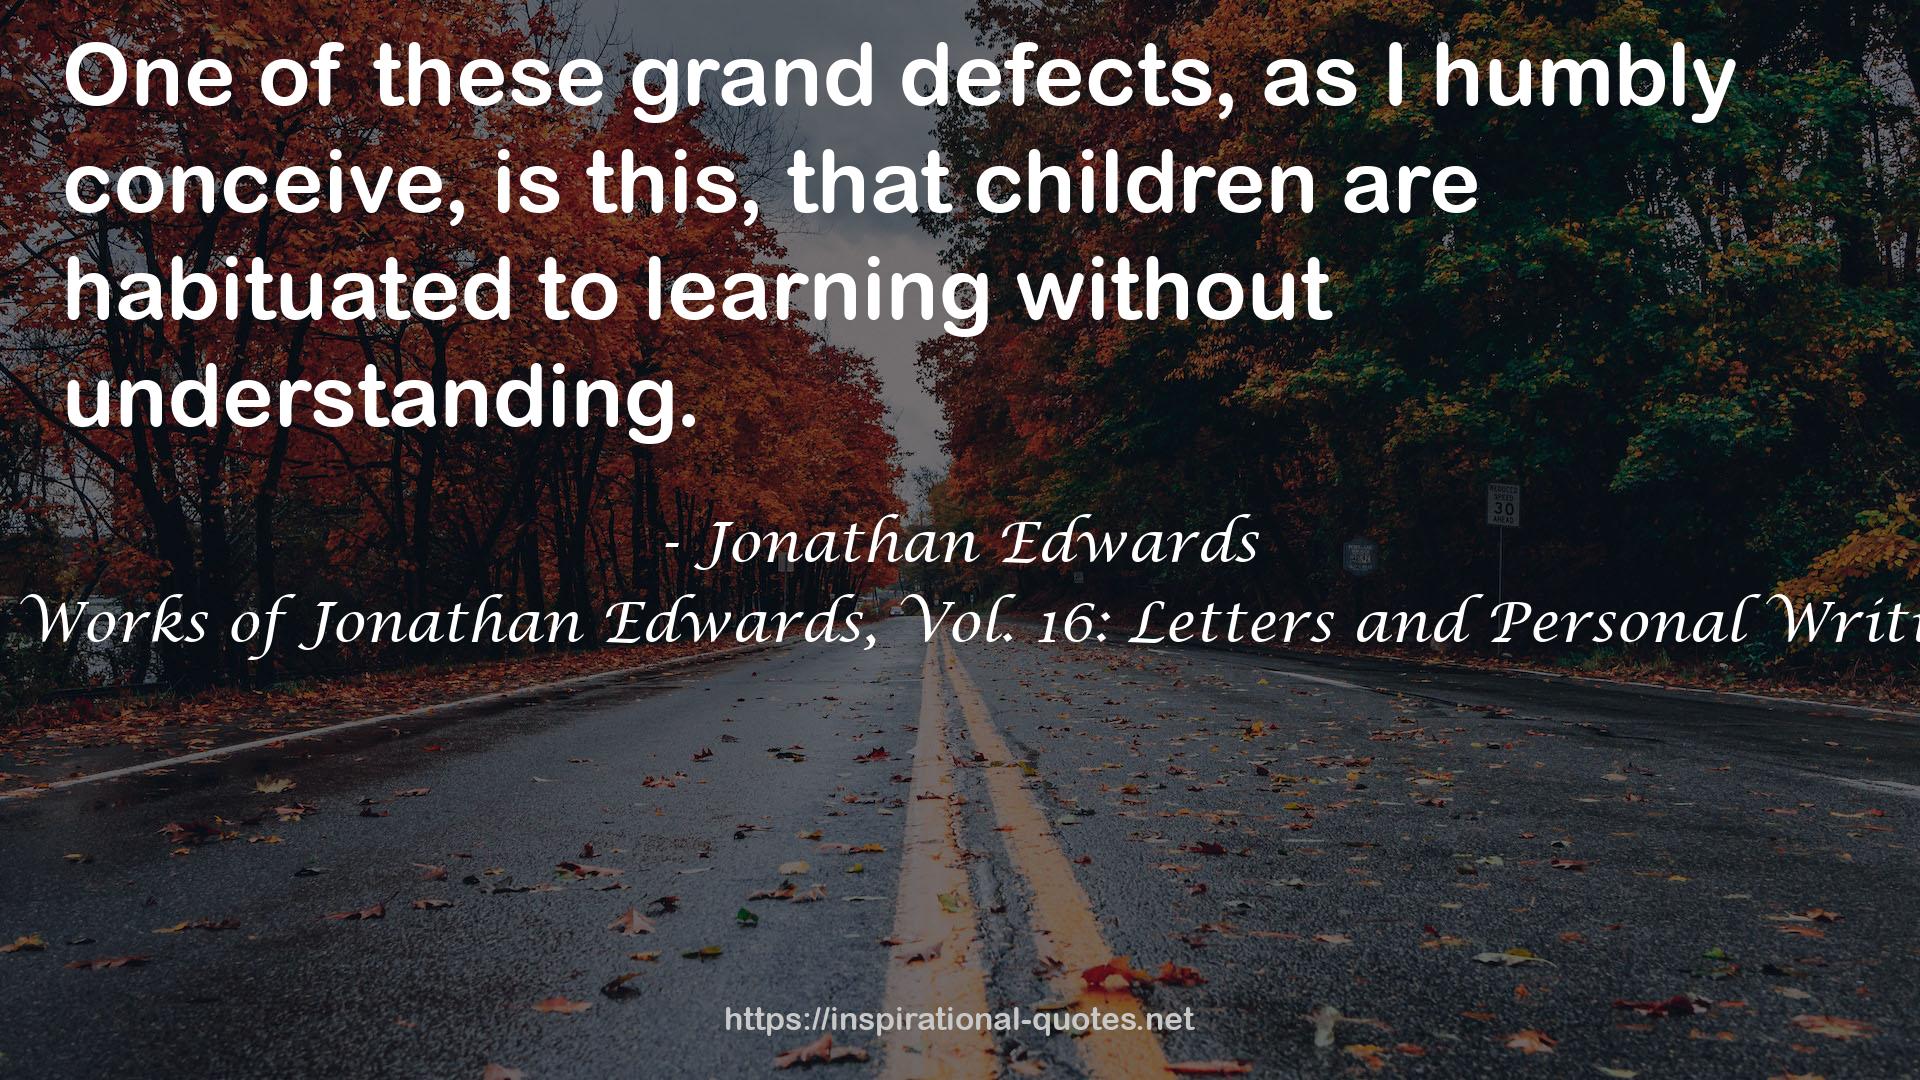 The Works of Jonathan Edwards, Vol. 16: Letters and Personal Writings QUOTES